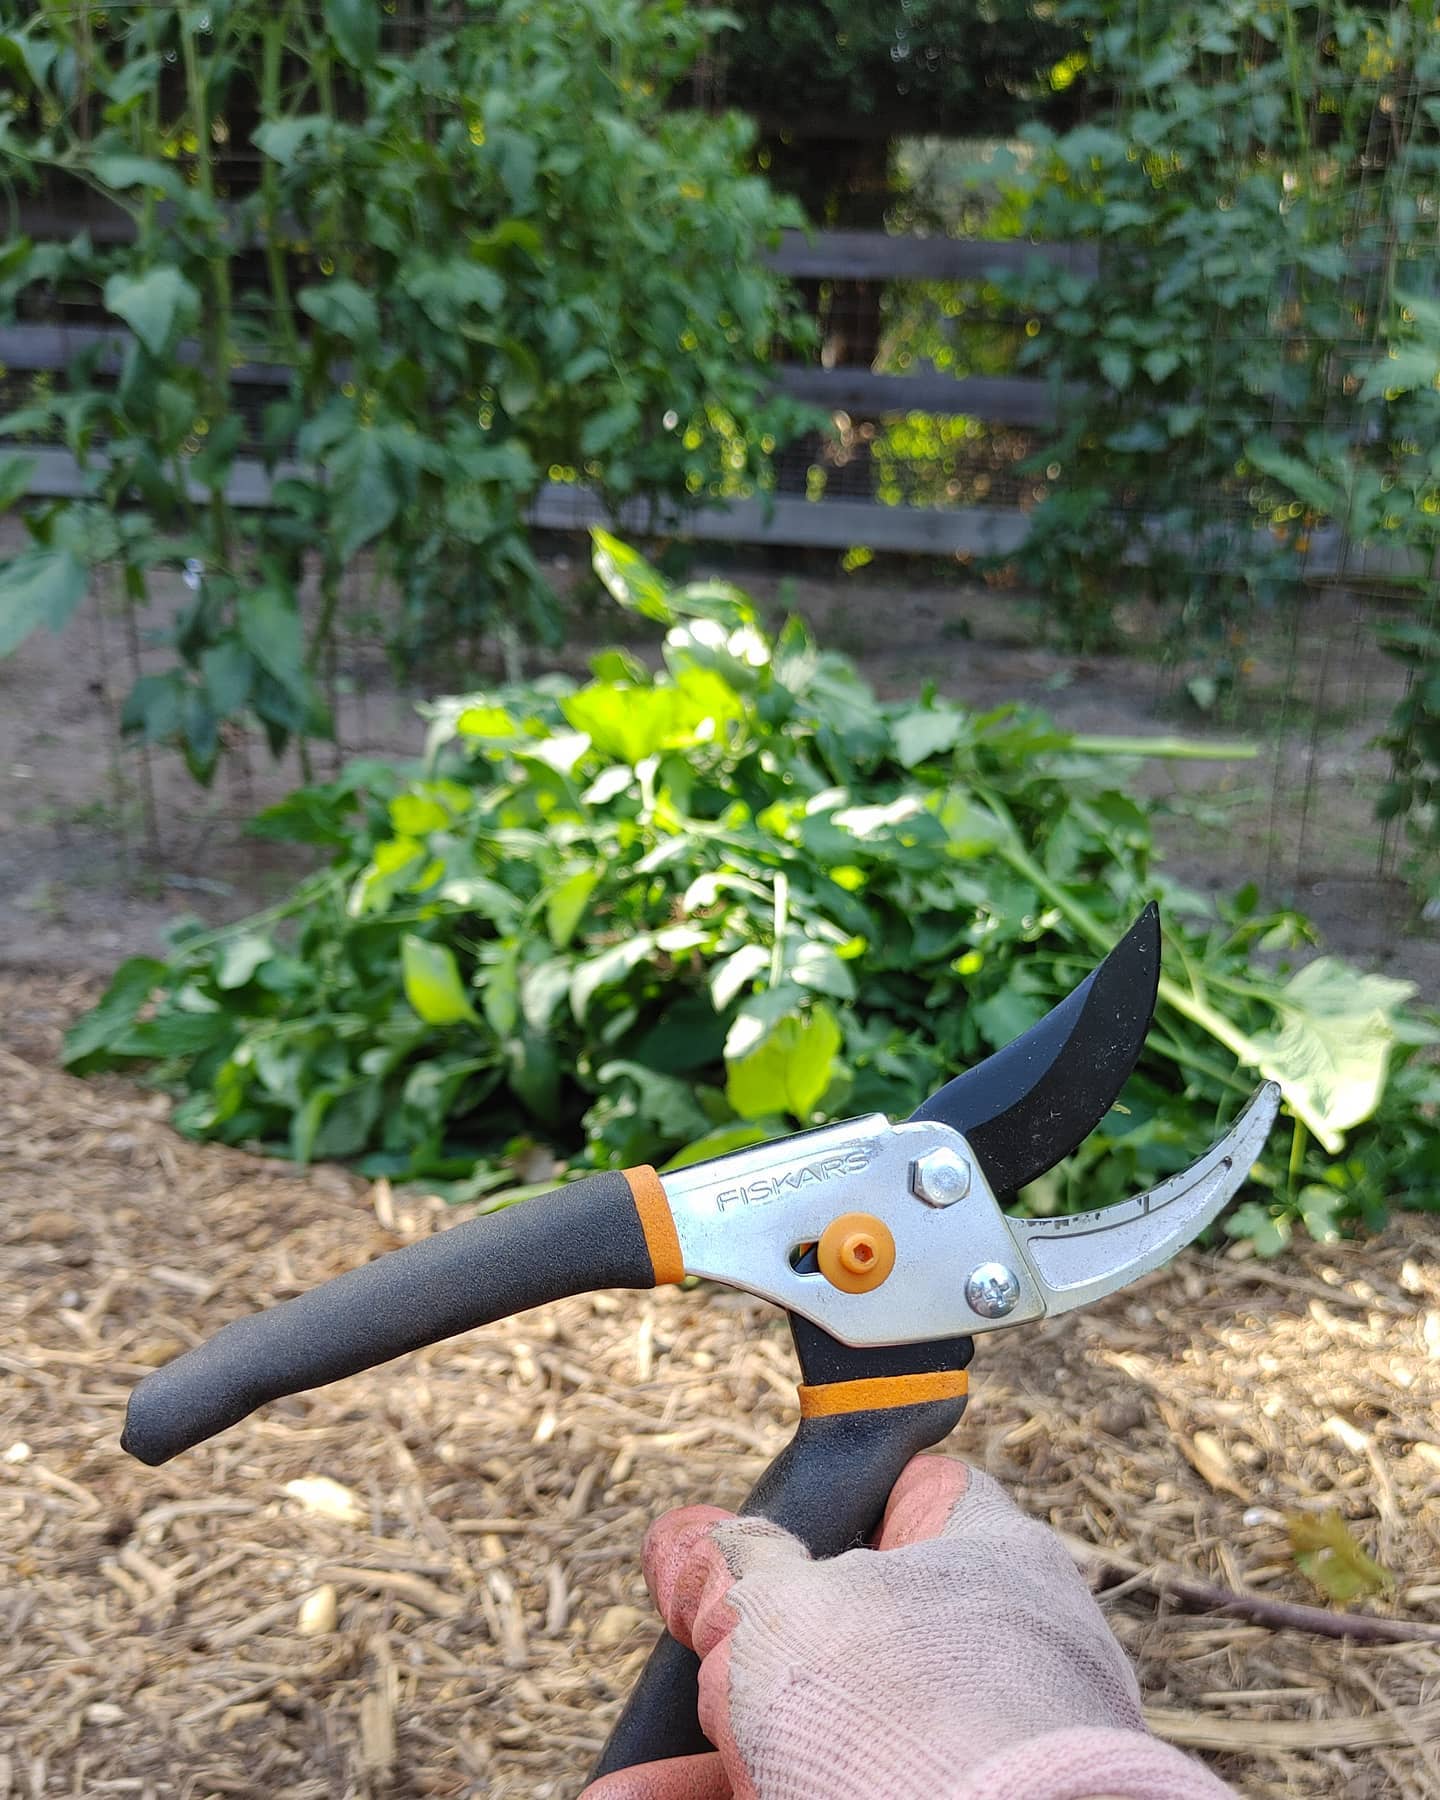 I got some new pruners and all of my tomatoes got a haircut! I cut off lots of extra stems and suckers to allow airflow to the plants. I also cut off all of the lowest leaves to prevent soil borne diseases from creeping in. It's hard to get started, but once I did it was really satisfying to open up the vines and let the sunshine in!